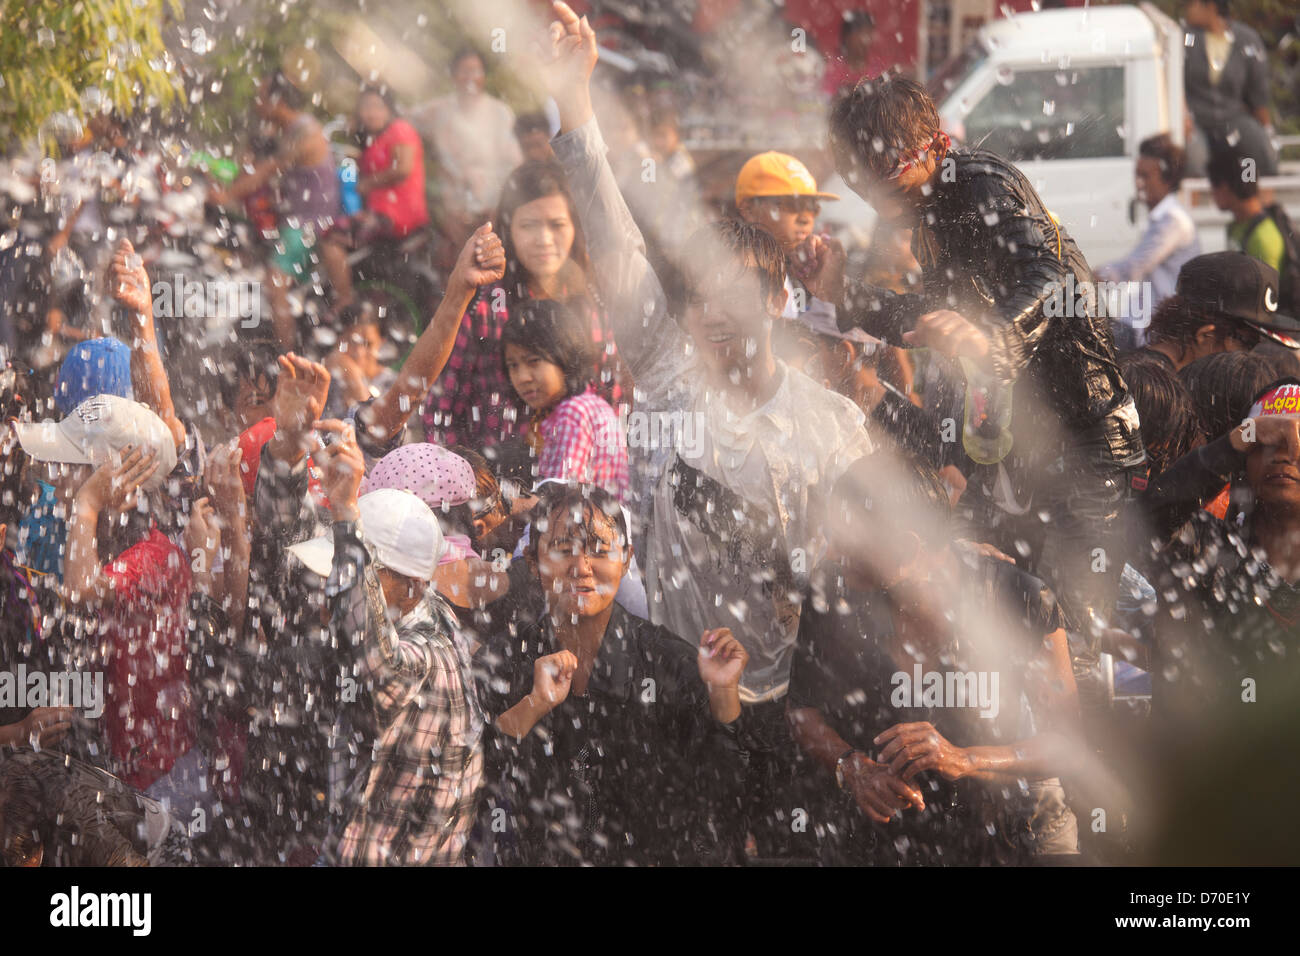 Celebrants dance in the street and get hosed with water during the Thingyan Water Festival in Mandalay, Myanmar. Stock Photo